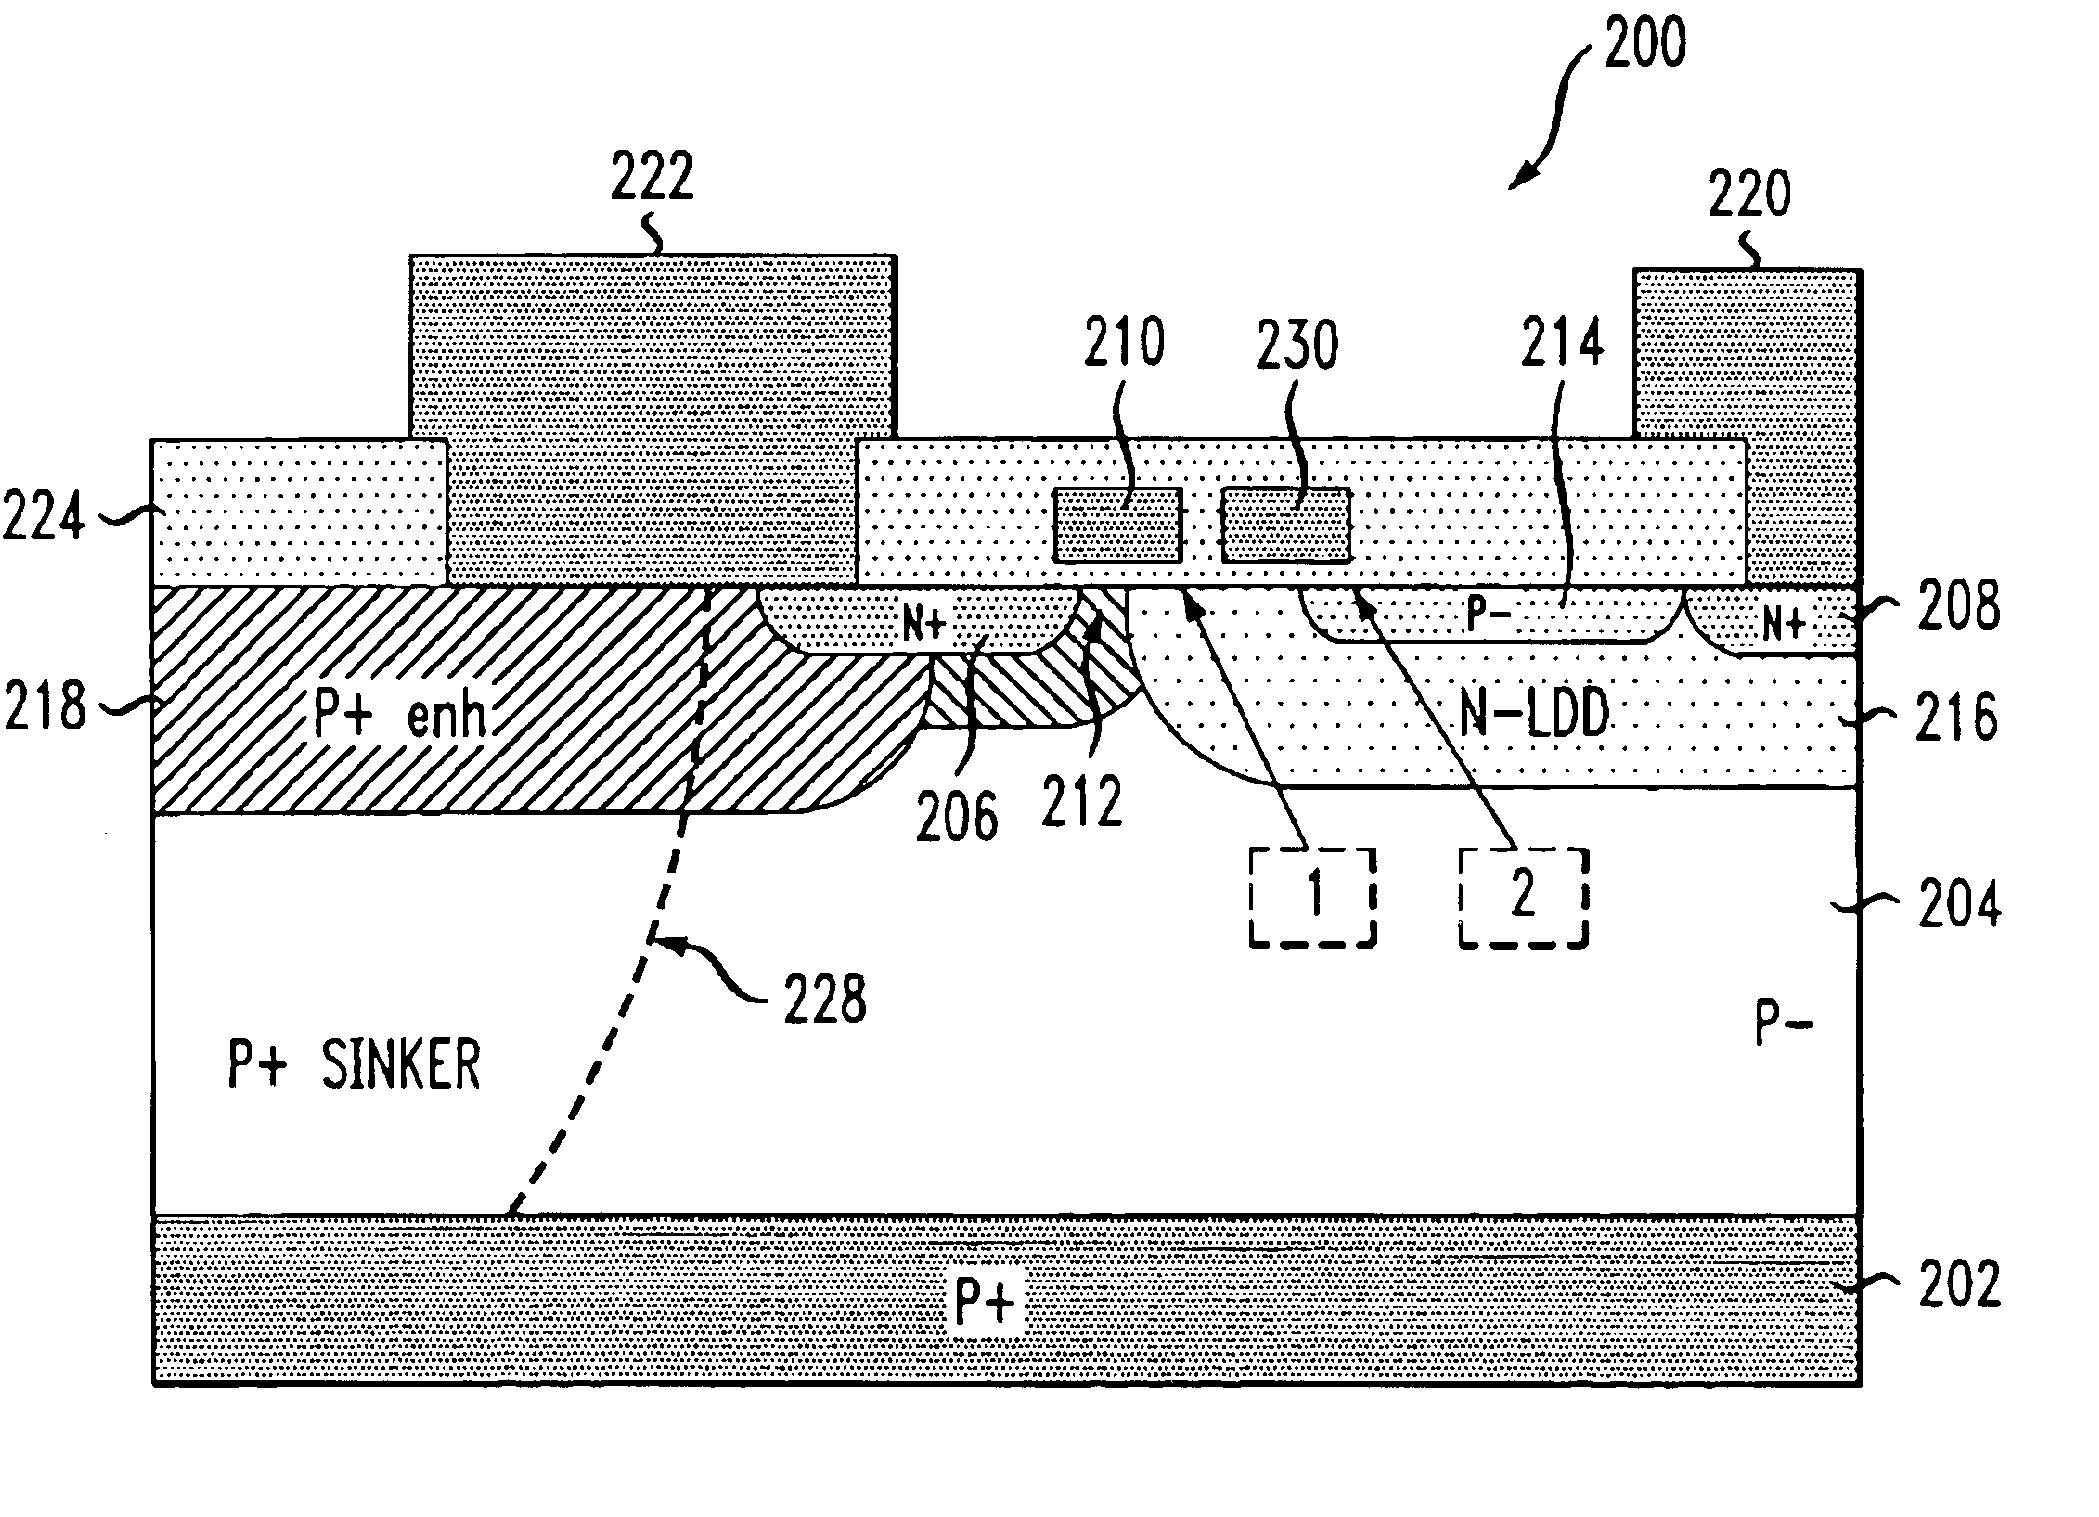 Metal-oxide-semiconductor device including a buried lightly-doped drain region